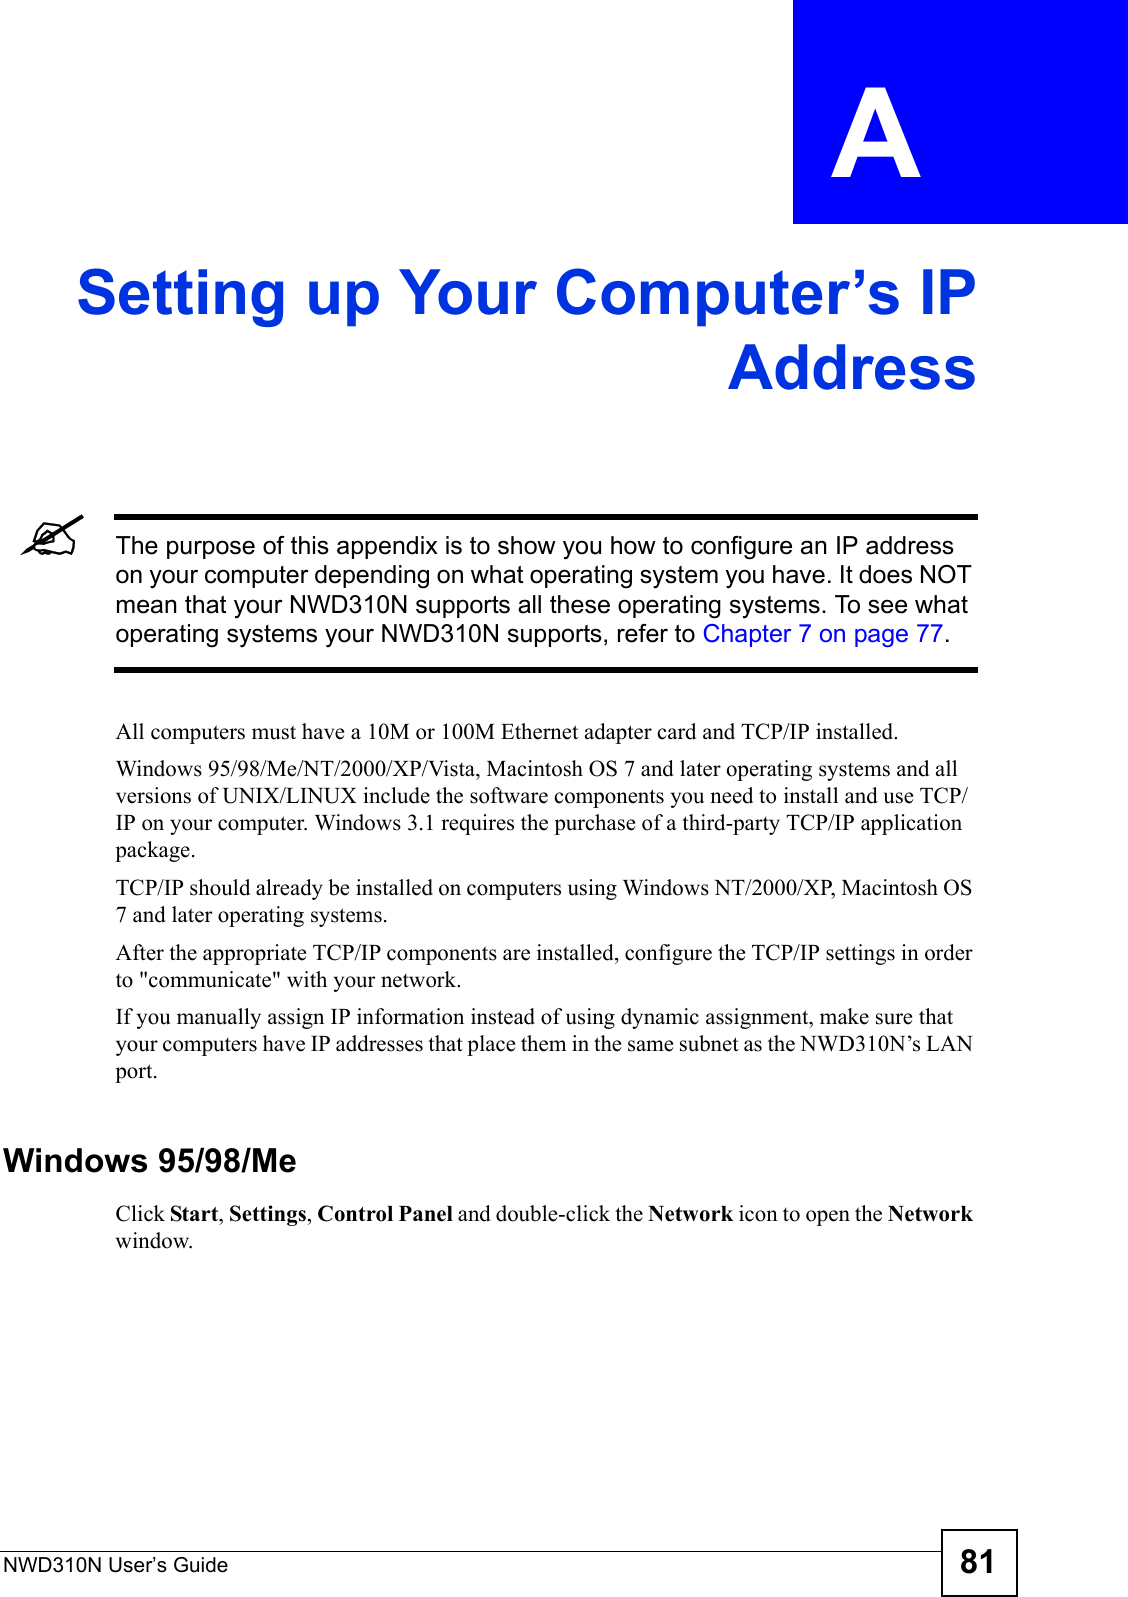 NWD310N User’s Guide 81APPENDIX  A Setting up Your Computer’s IPAddress&quot;The purpose of this appendix is to show you how to configure an IP address on your computer depending on what operating system you have. It does NOT mean that your NWD310N supports all these operating systems. To see what operating systems your NWD310N supports, refer to Chapter 7 on page 77.All computers must have a 10M or 100M Ethernet adapter card and TCP/IP installed. Windows 95/98/Me/NT/2000/XP/Vista, Macintosh OS 7 and later operating systems and all versions of UNIX/LINUX include the software components you need to install and use TCP/IP on your computer. Windows 3.1 requires the purchase of a third-party TCP/IP application package.TCP/IP should already be installed on computers using Windows NT/2000/XP, Macintosh OS 7 and later operating systems.After the appropriate TCP/IP components are installed, configure the TCP/IP settings in order to &quot;communicate&quot; with your network. If you manually assign IP information instead of using dynamic assignment, make sure that your computers have IP addresses that place them in the same subnet as the NWD310N’s LAN port.Windows 95/98/MeClick Start, Settings, Control Panel and double-click the Network icon to open the Network window.